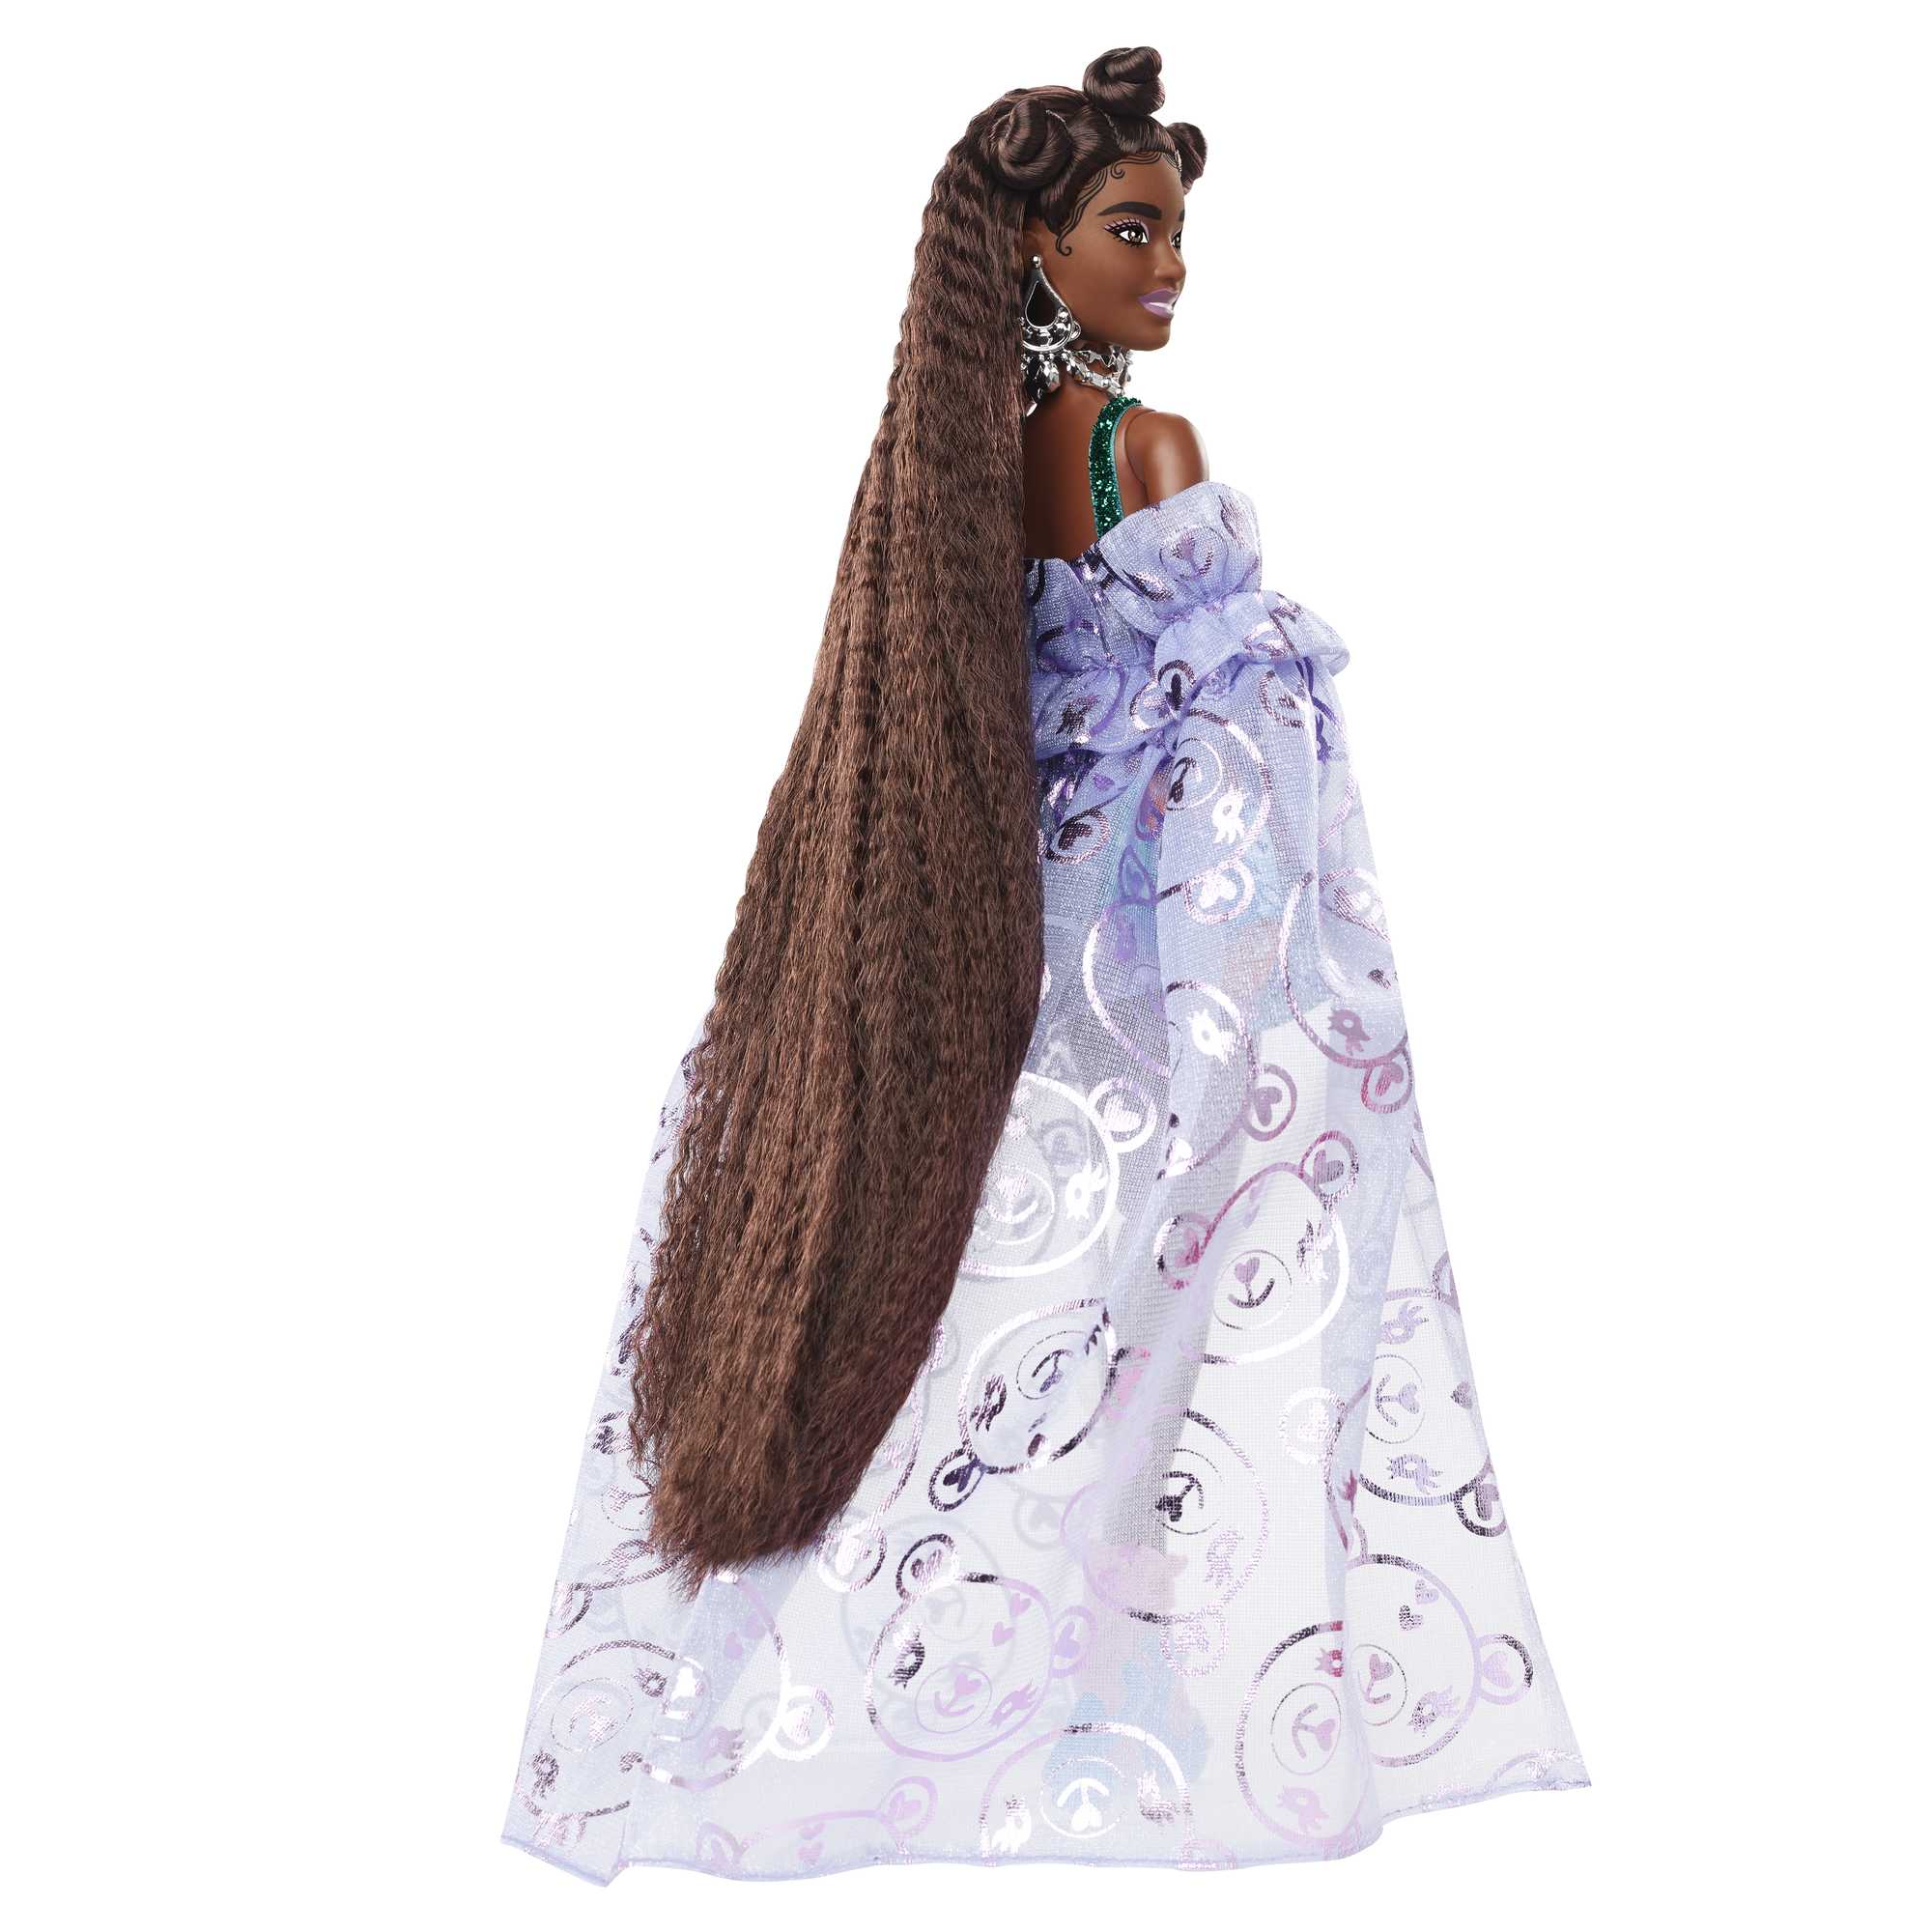 Barbie Released EXTRA Fancy Dolls with Voluminous Gowns and Trendy  Hairstyles